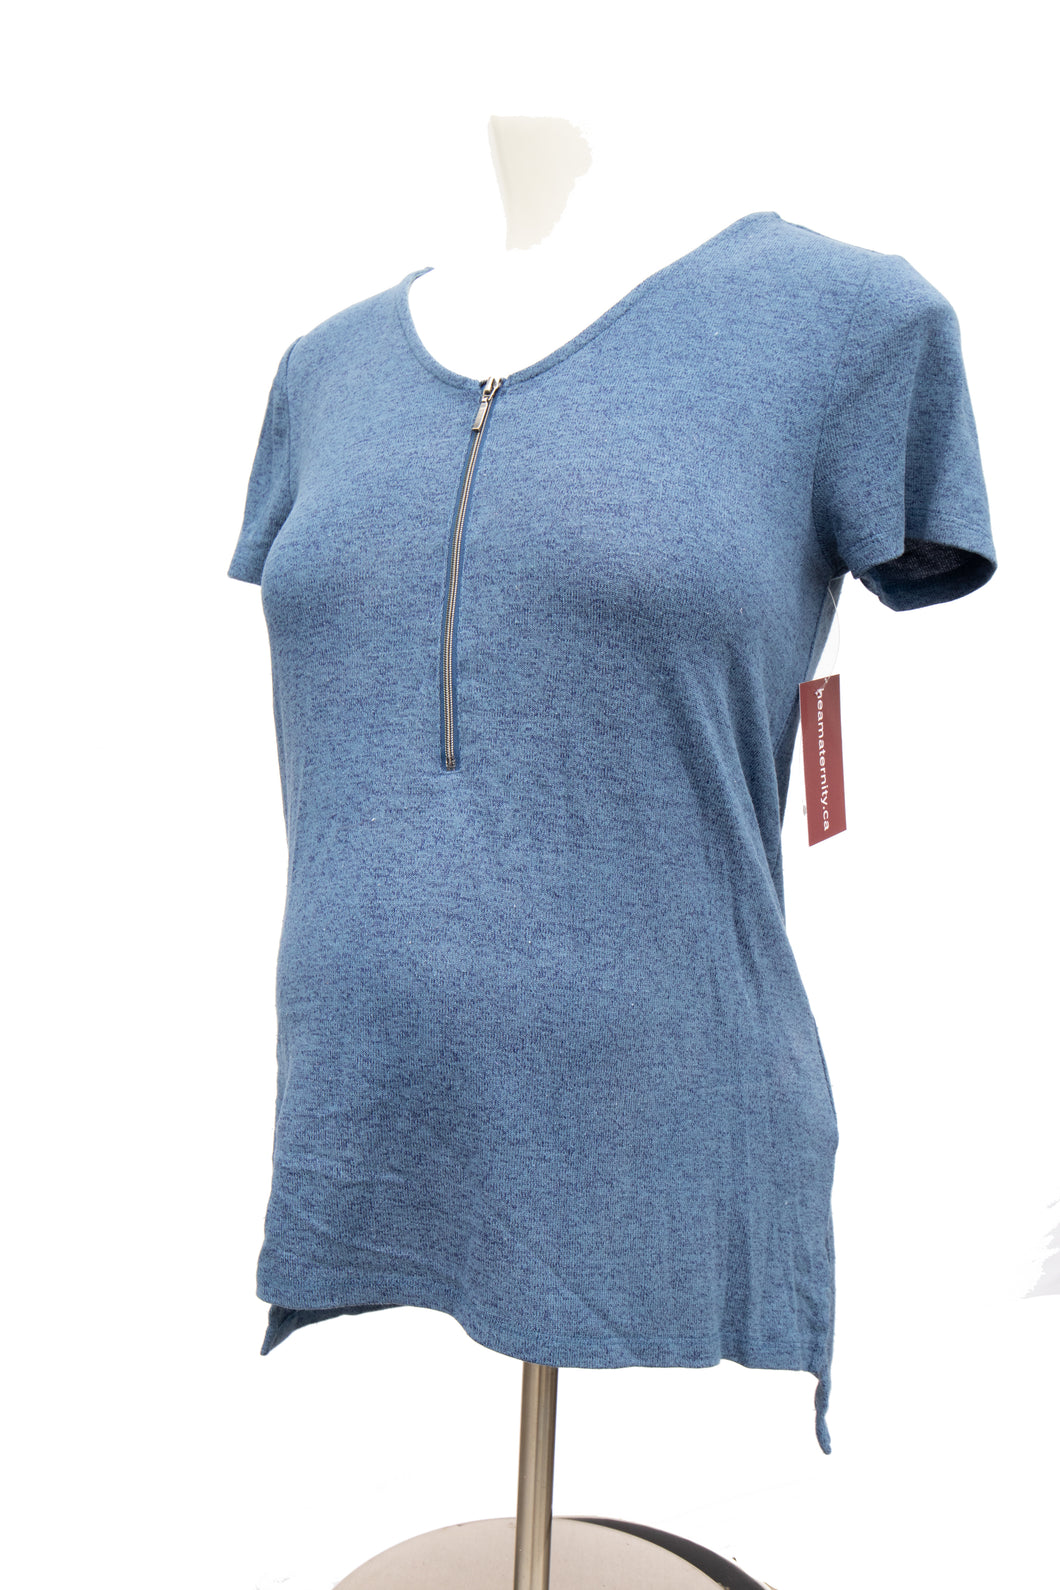 S ThymeShort Sleeve Feeding Top with Zipper Access